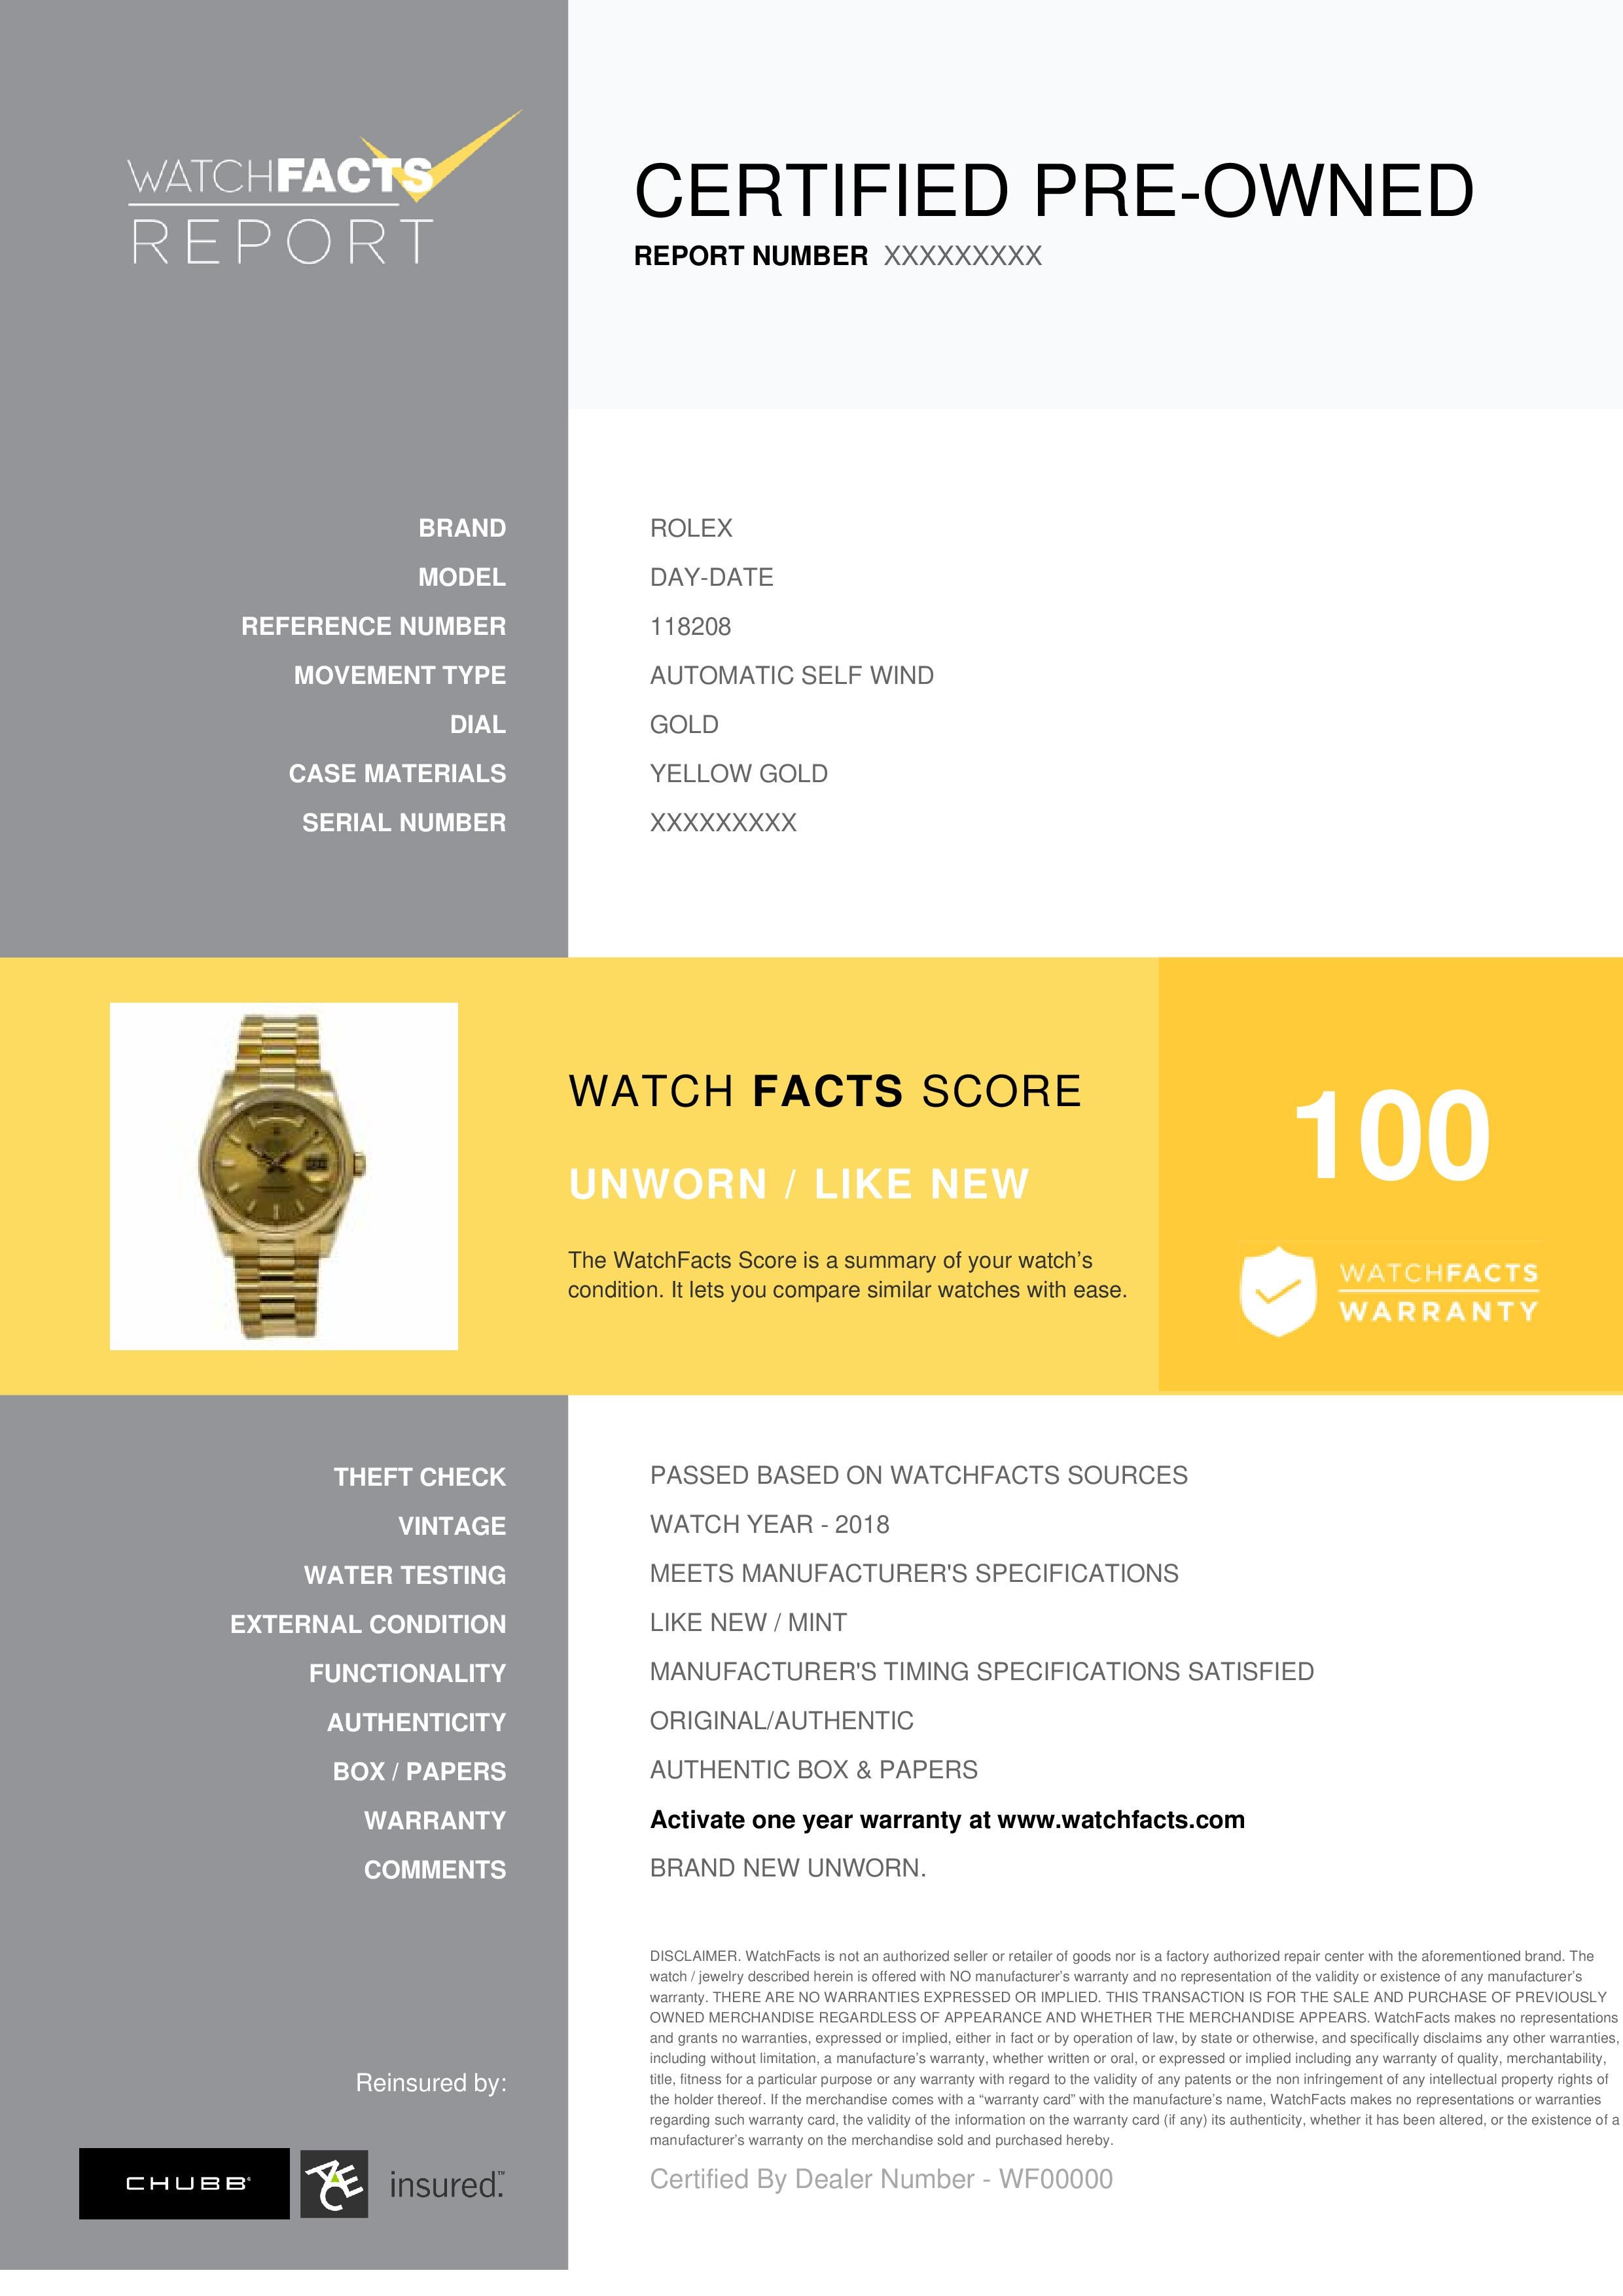 Rolex Day-Date Reference #: 118208. Mens Automatic Self Wind Watch Yellow Gold Gold 36 MM. Verified and Certified by WatchFacts. 1 year warranty offered by WatchFacts.
